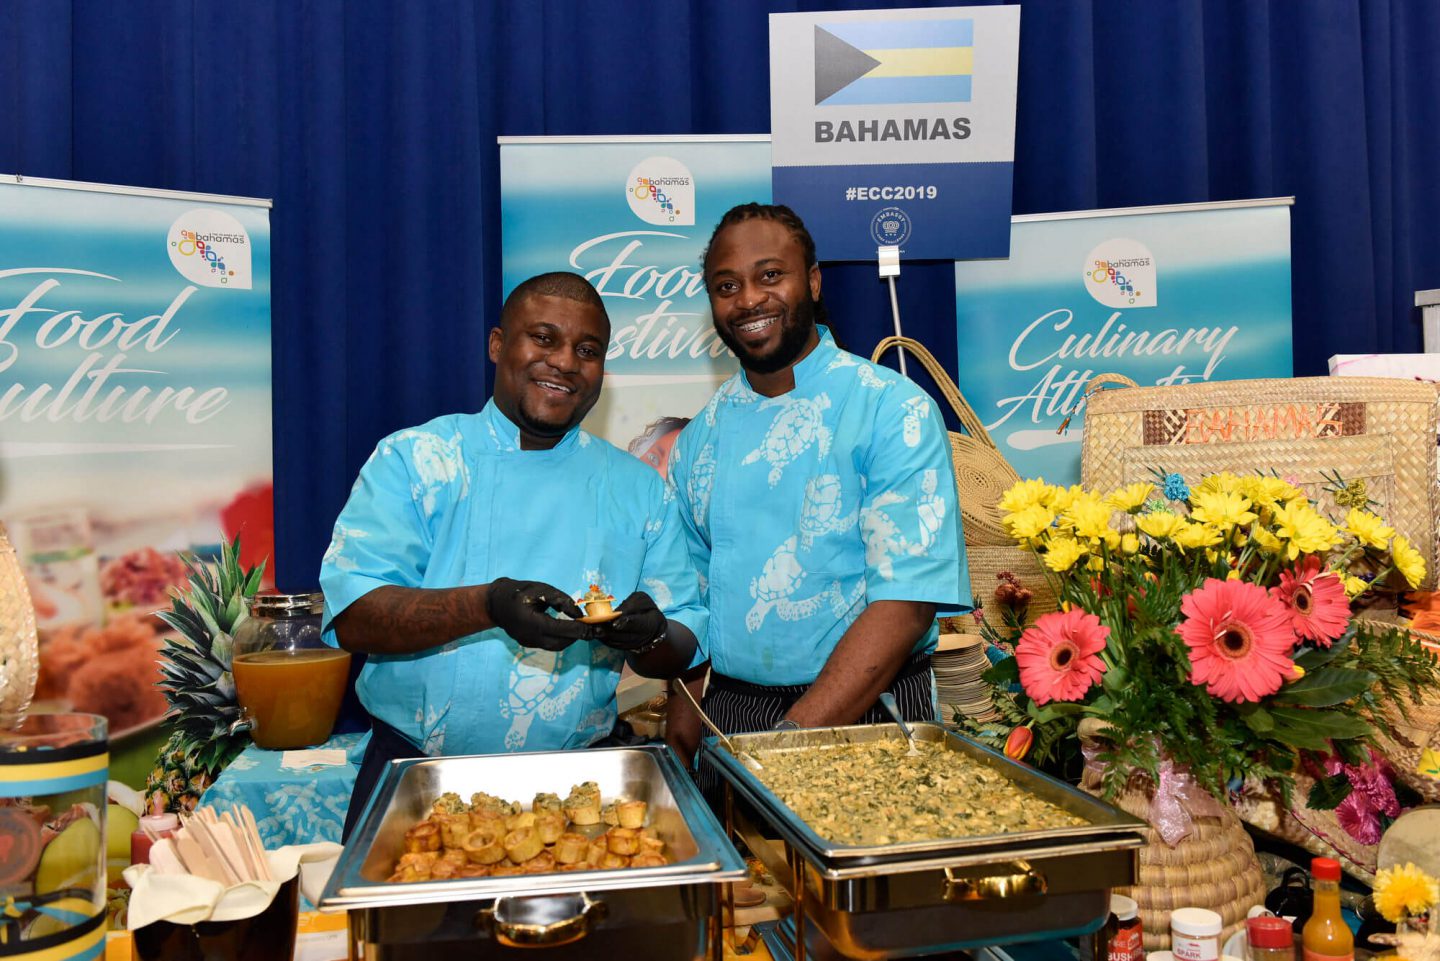 EventsDC’s 11th Annual Embassy Chef Challenge